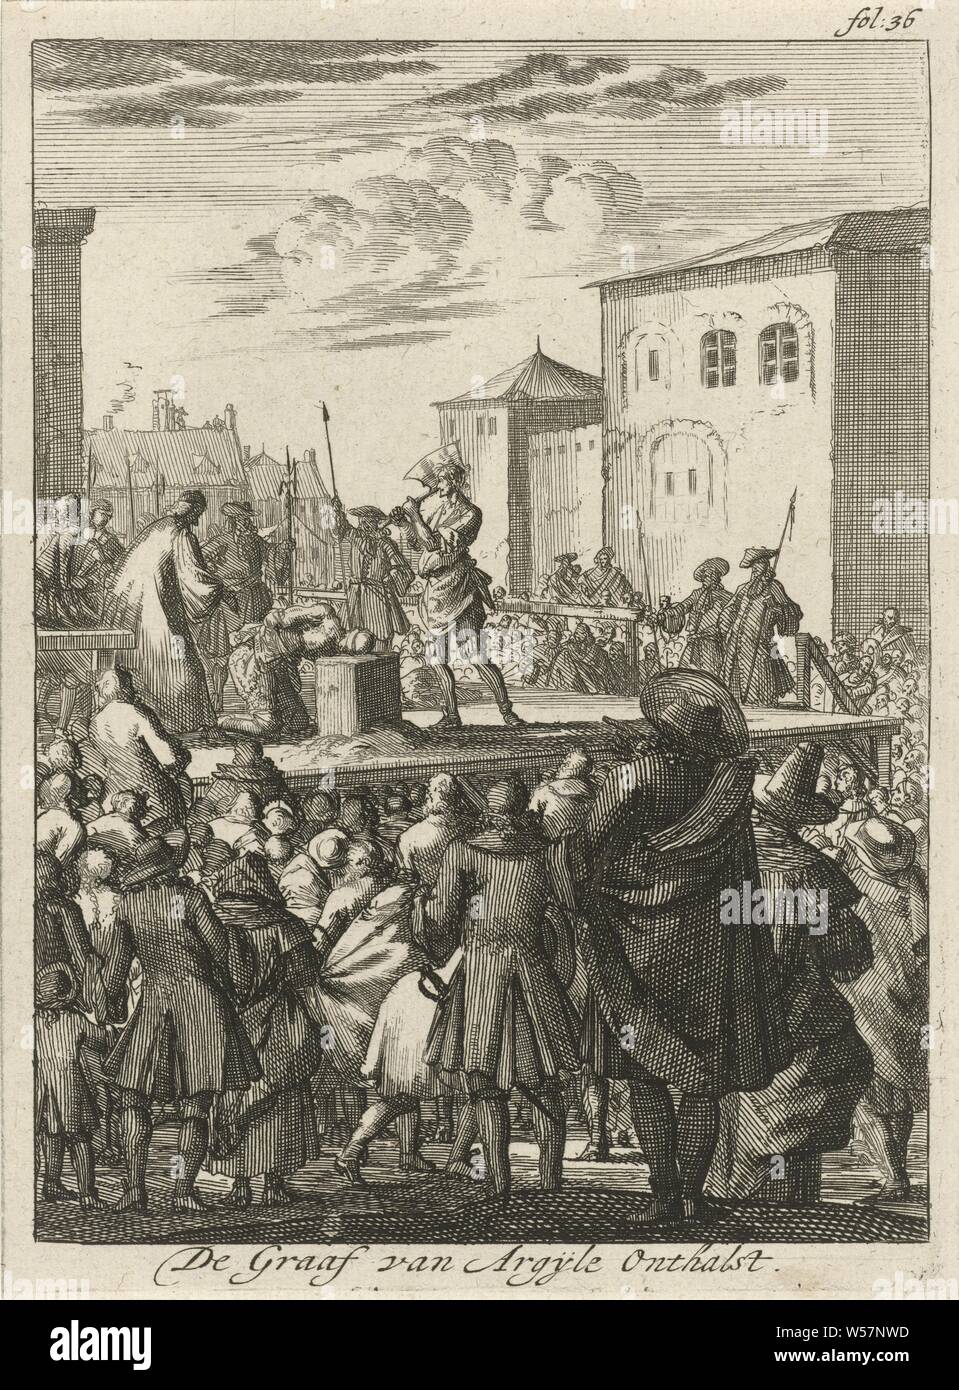 Execution of the Count of Argyll, 1685 The Count of Argijle Reception (title on object), Preparation for the beheading of Archibald Campbell, Second Marquis and Ninth Count of Argyll in Edinburgh on June 30, 1685. The Count of Argyll led the Duke of Monmouth in a revolt against the Catholic King James. Print marked upper right: fol: 36, (person under sentence of death) on the way to the scaffold or place of execution, Edinburgh, Archibald Campbell (2nd Marquis and 9th Earl of Argyll), Jan Luyken, Amsterdam, 1689, paper, etching, h 182 mm × w 135 mm Stock Photo